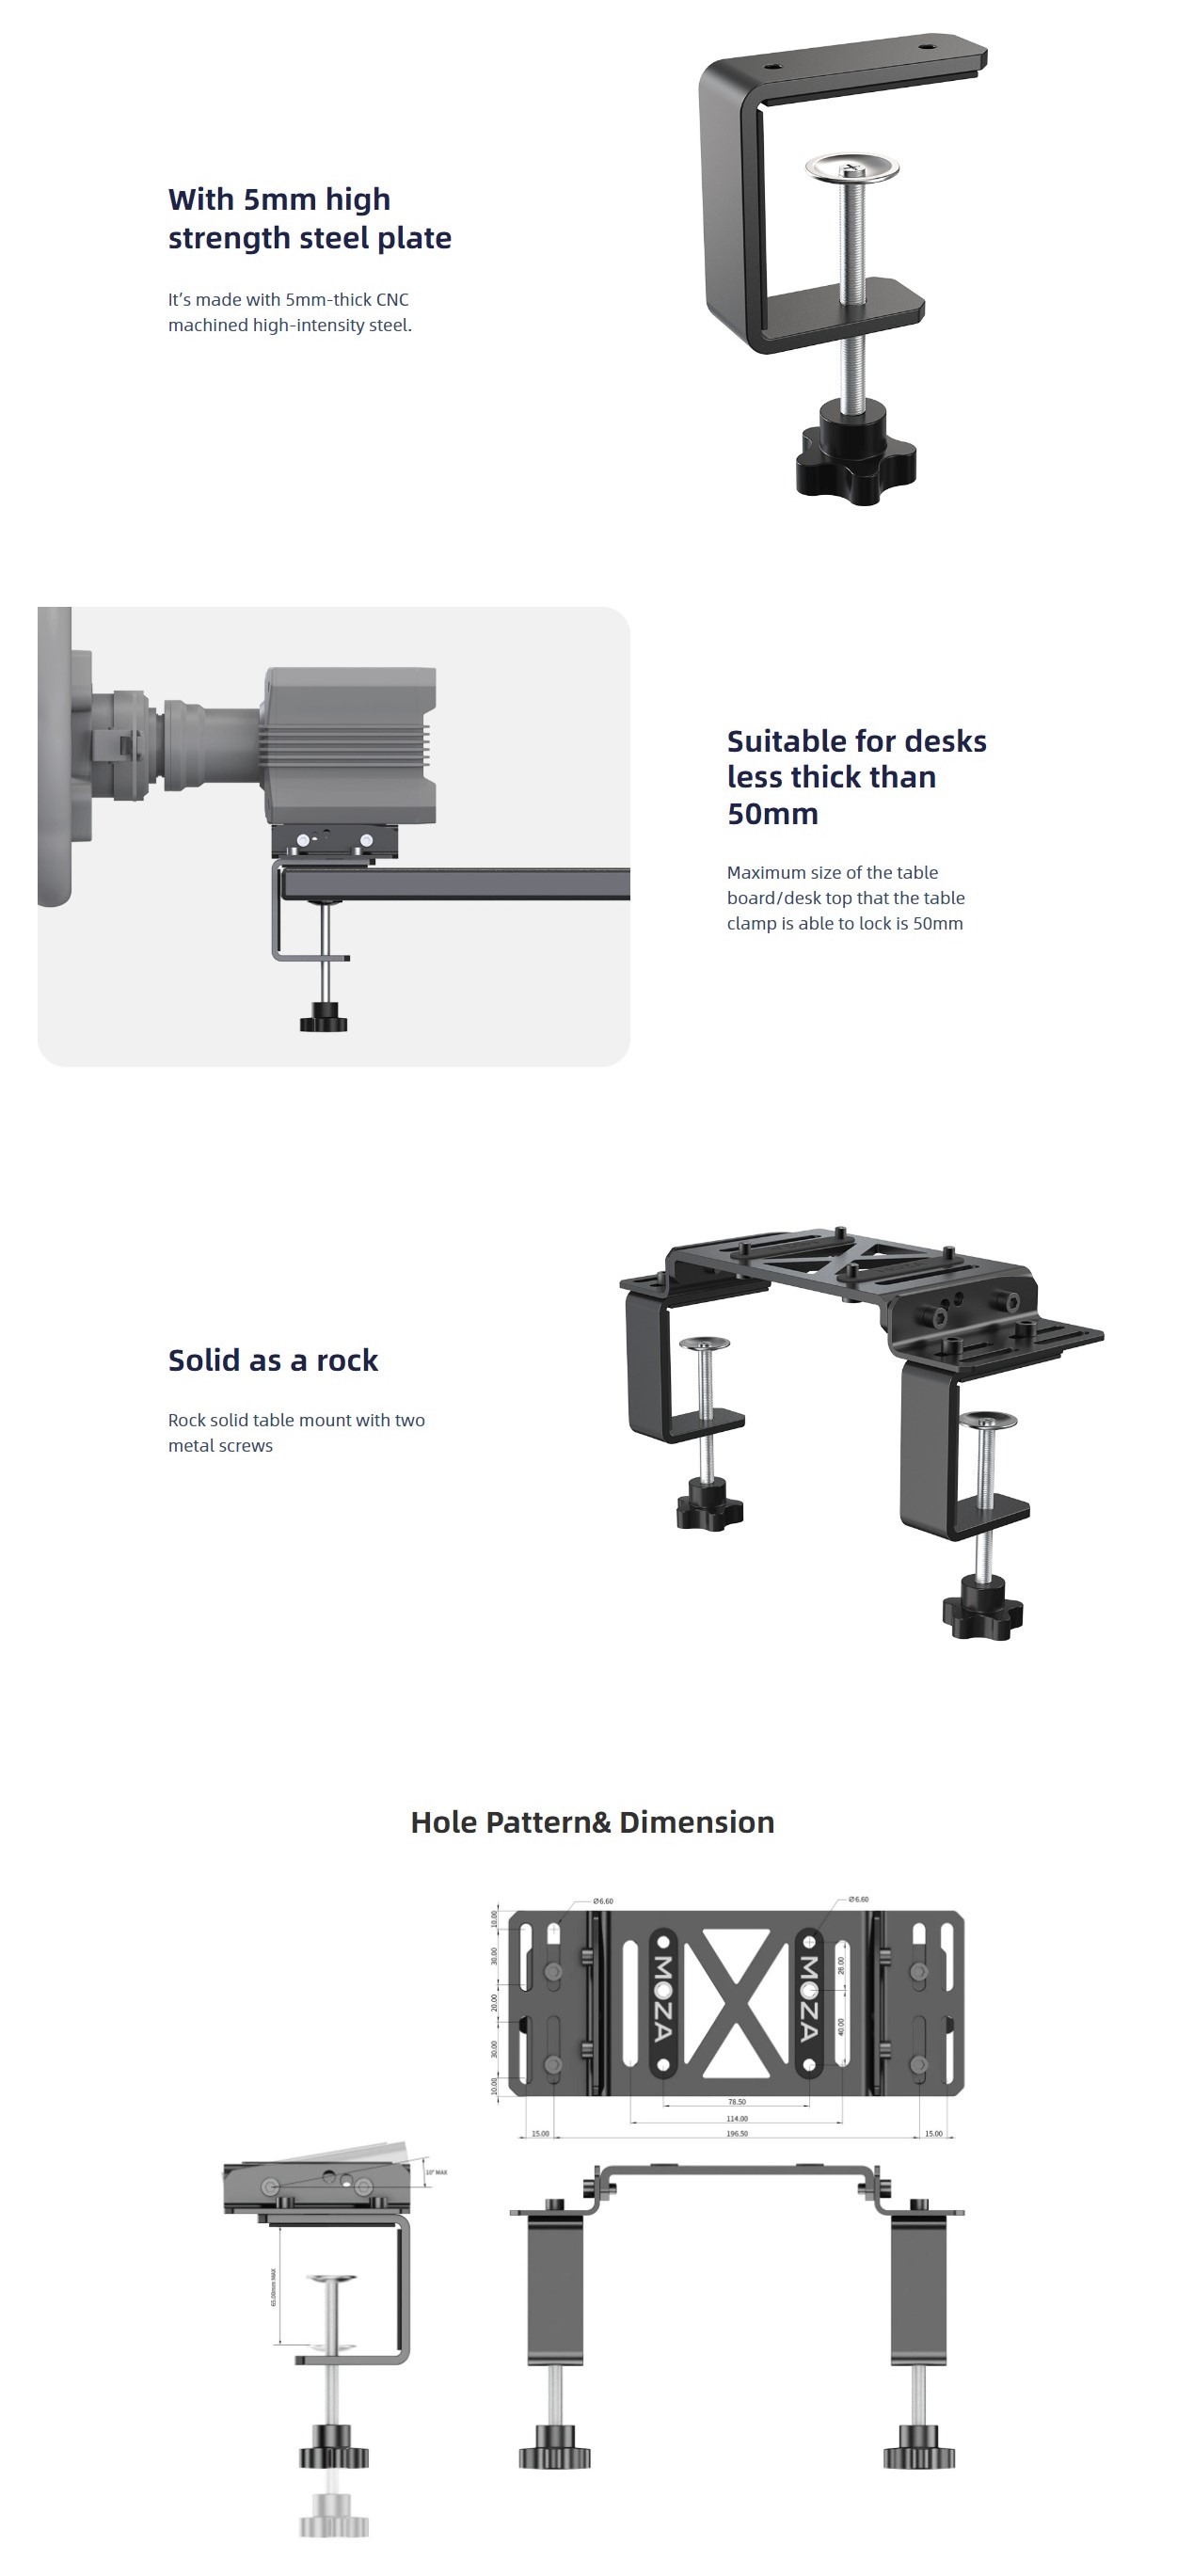 A large marketing image providing additional information about the product MOZA Table Clamp - Additional alt info not provided